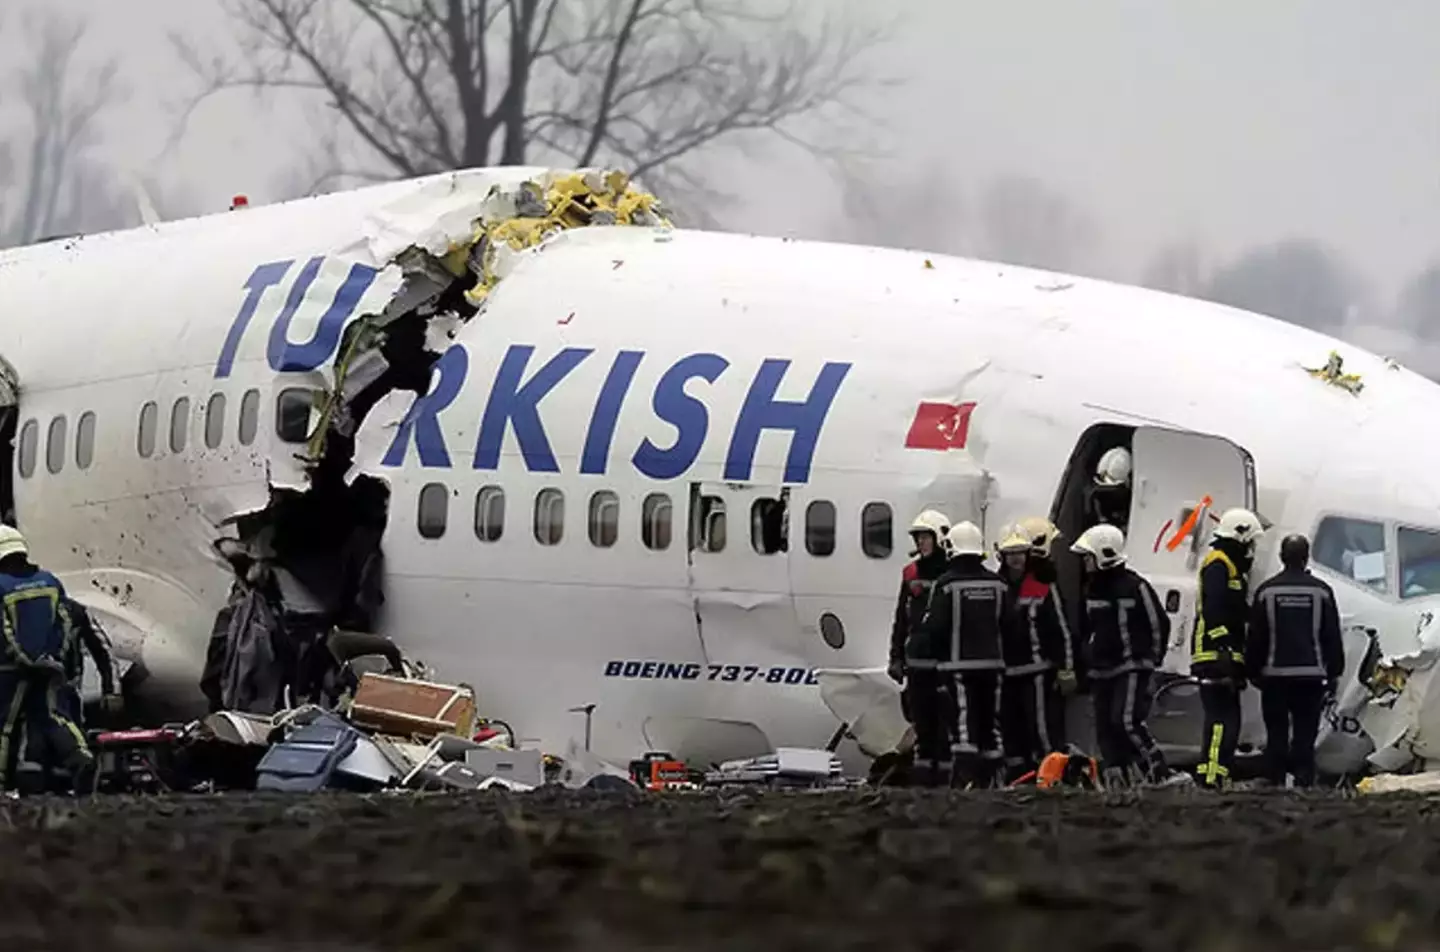 Another image showed the wreckage of a 2009 Turkish Airline crash.